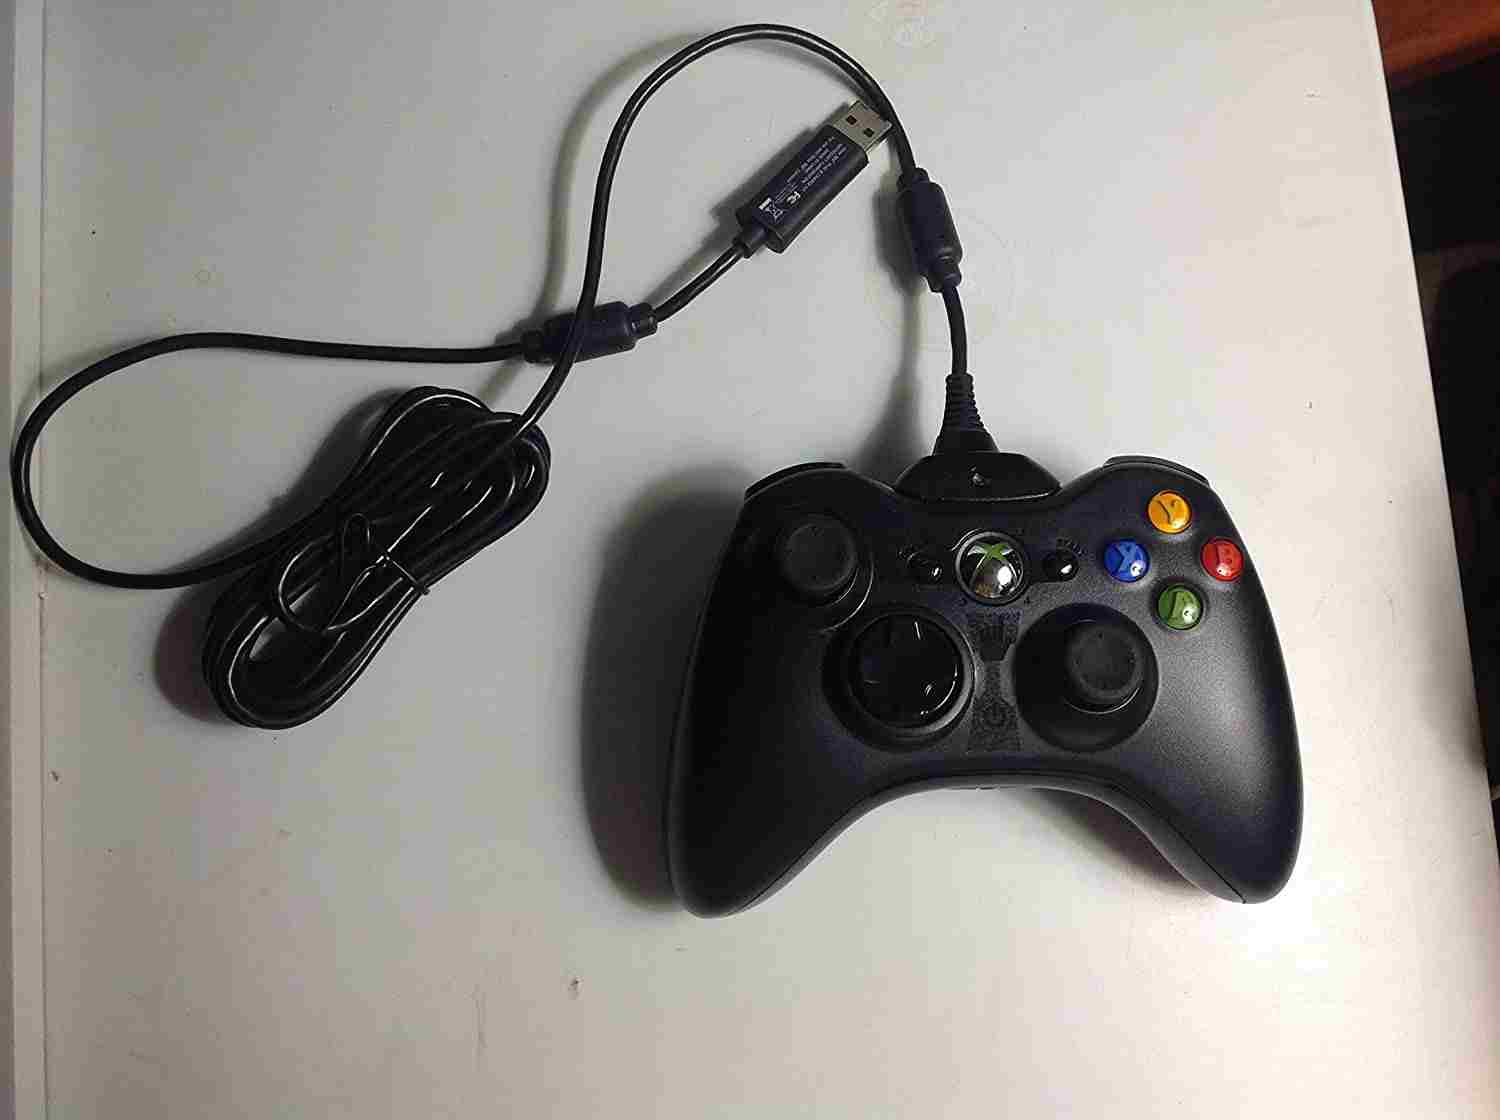 Play and charge kit for Xbox 360 controller